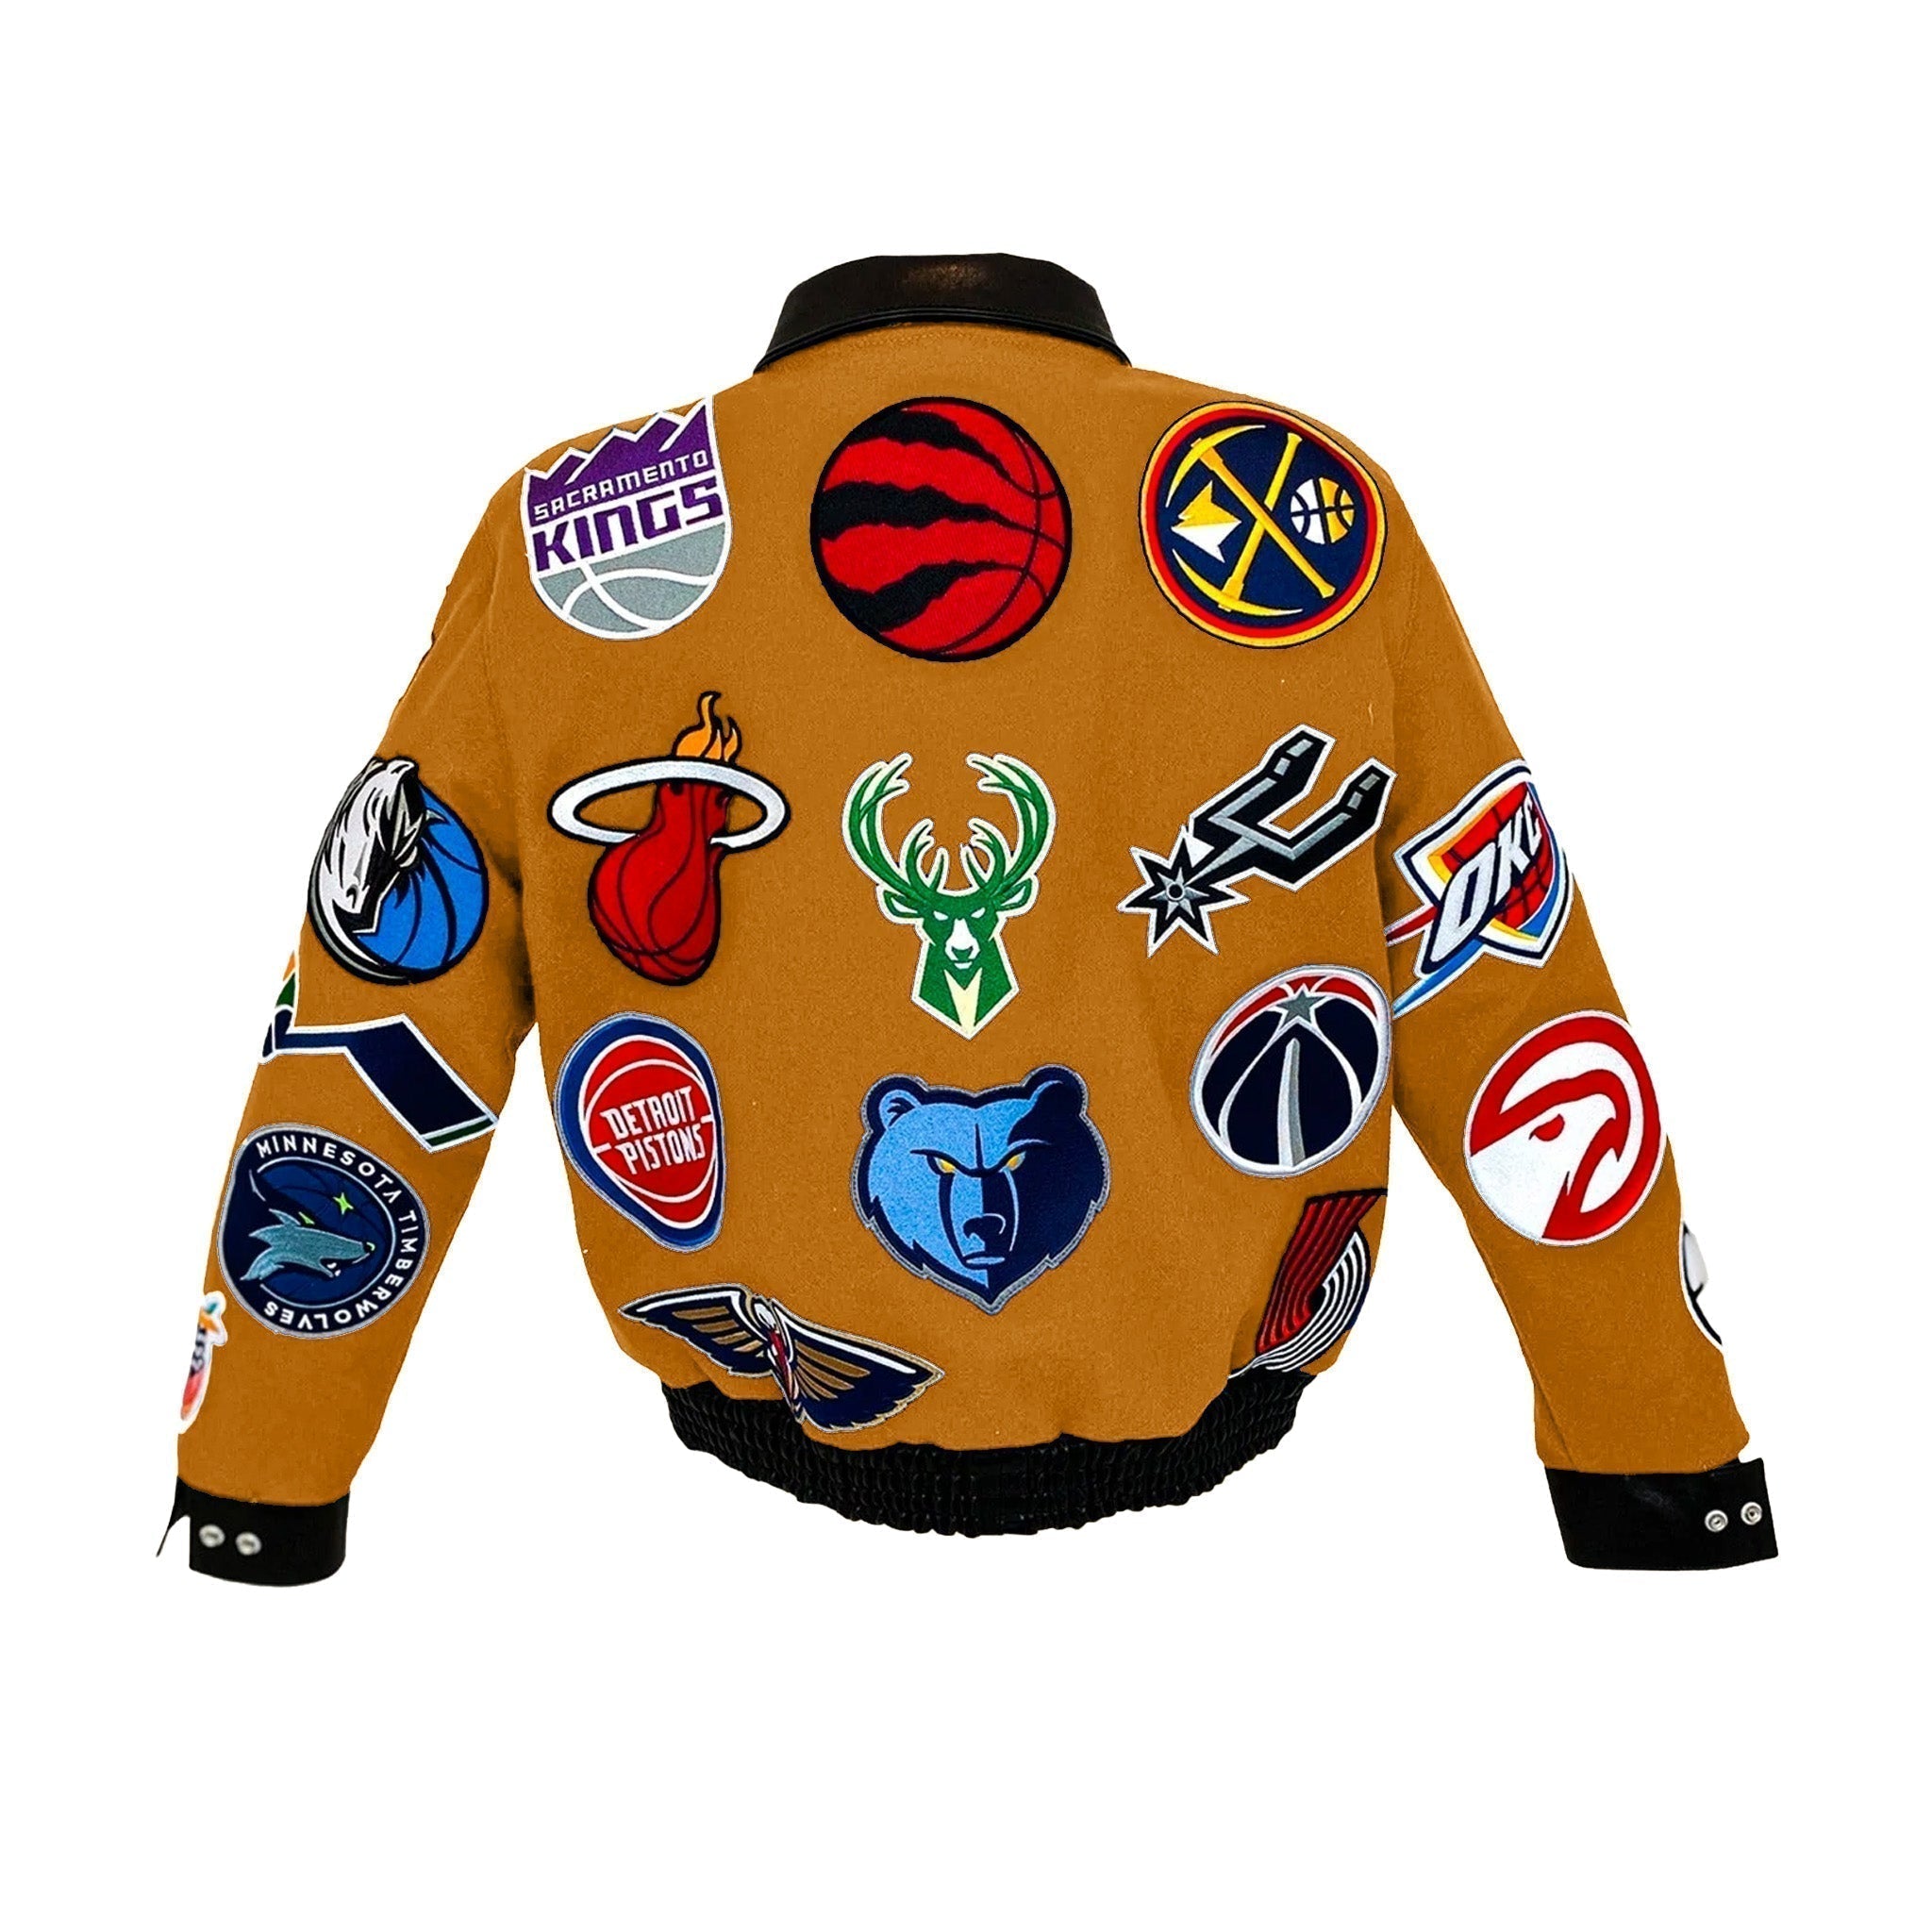 NBA Collage Wool & Leather Jacket Gold